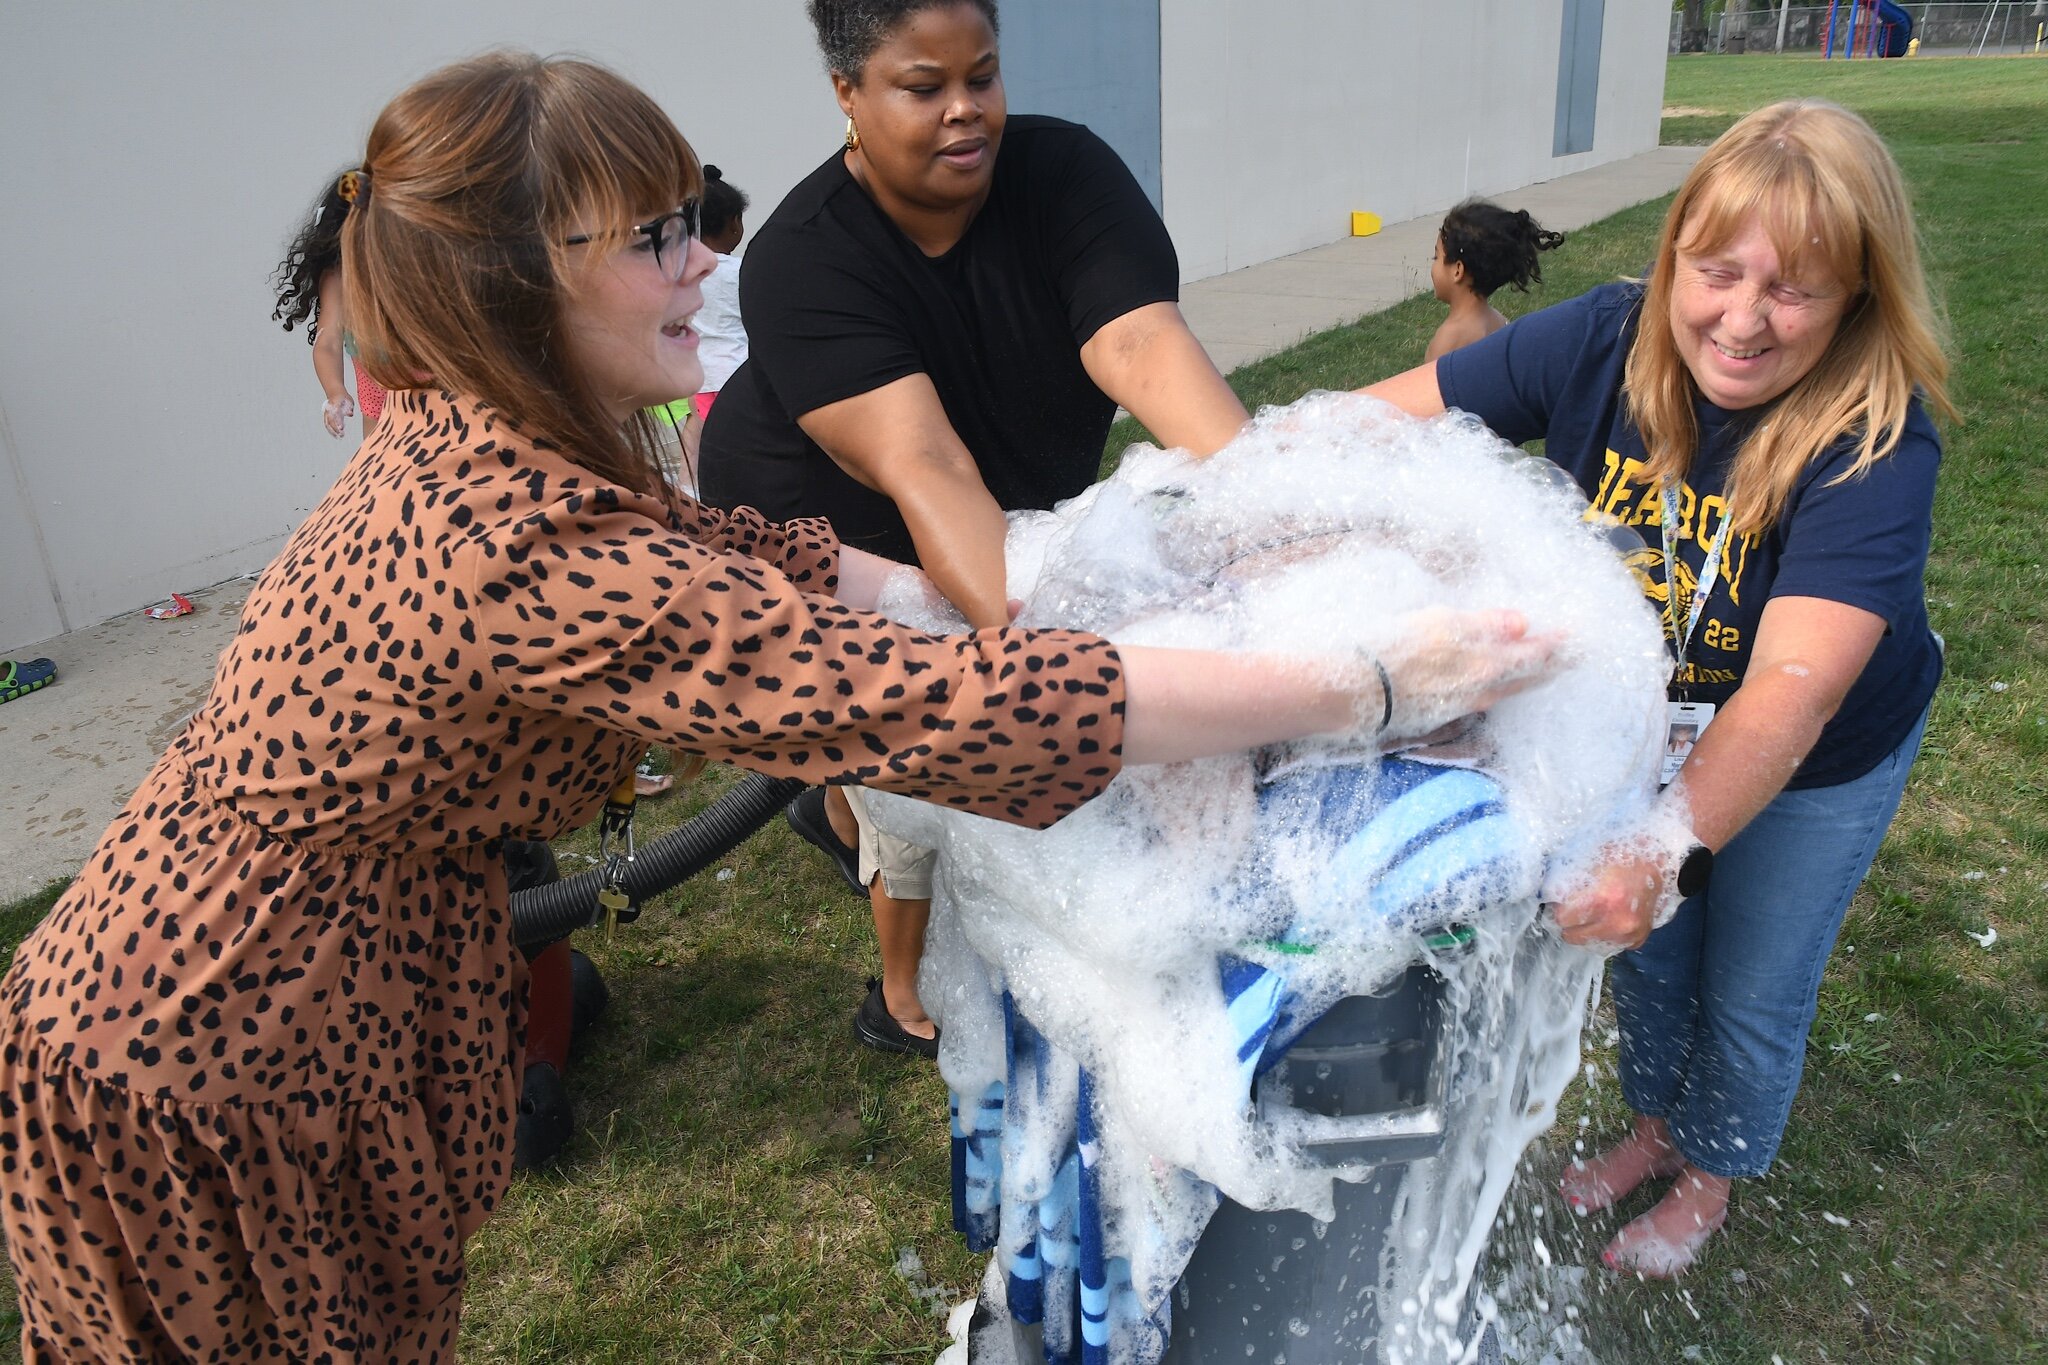 Tricha Grajek, left, SaRah Williams, center, and Lisa Merry, right make bubbles during a morning session at Franklin-Post Elementary School.